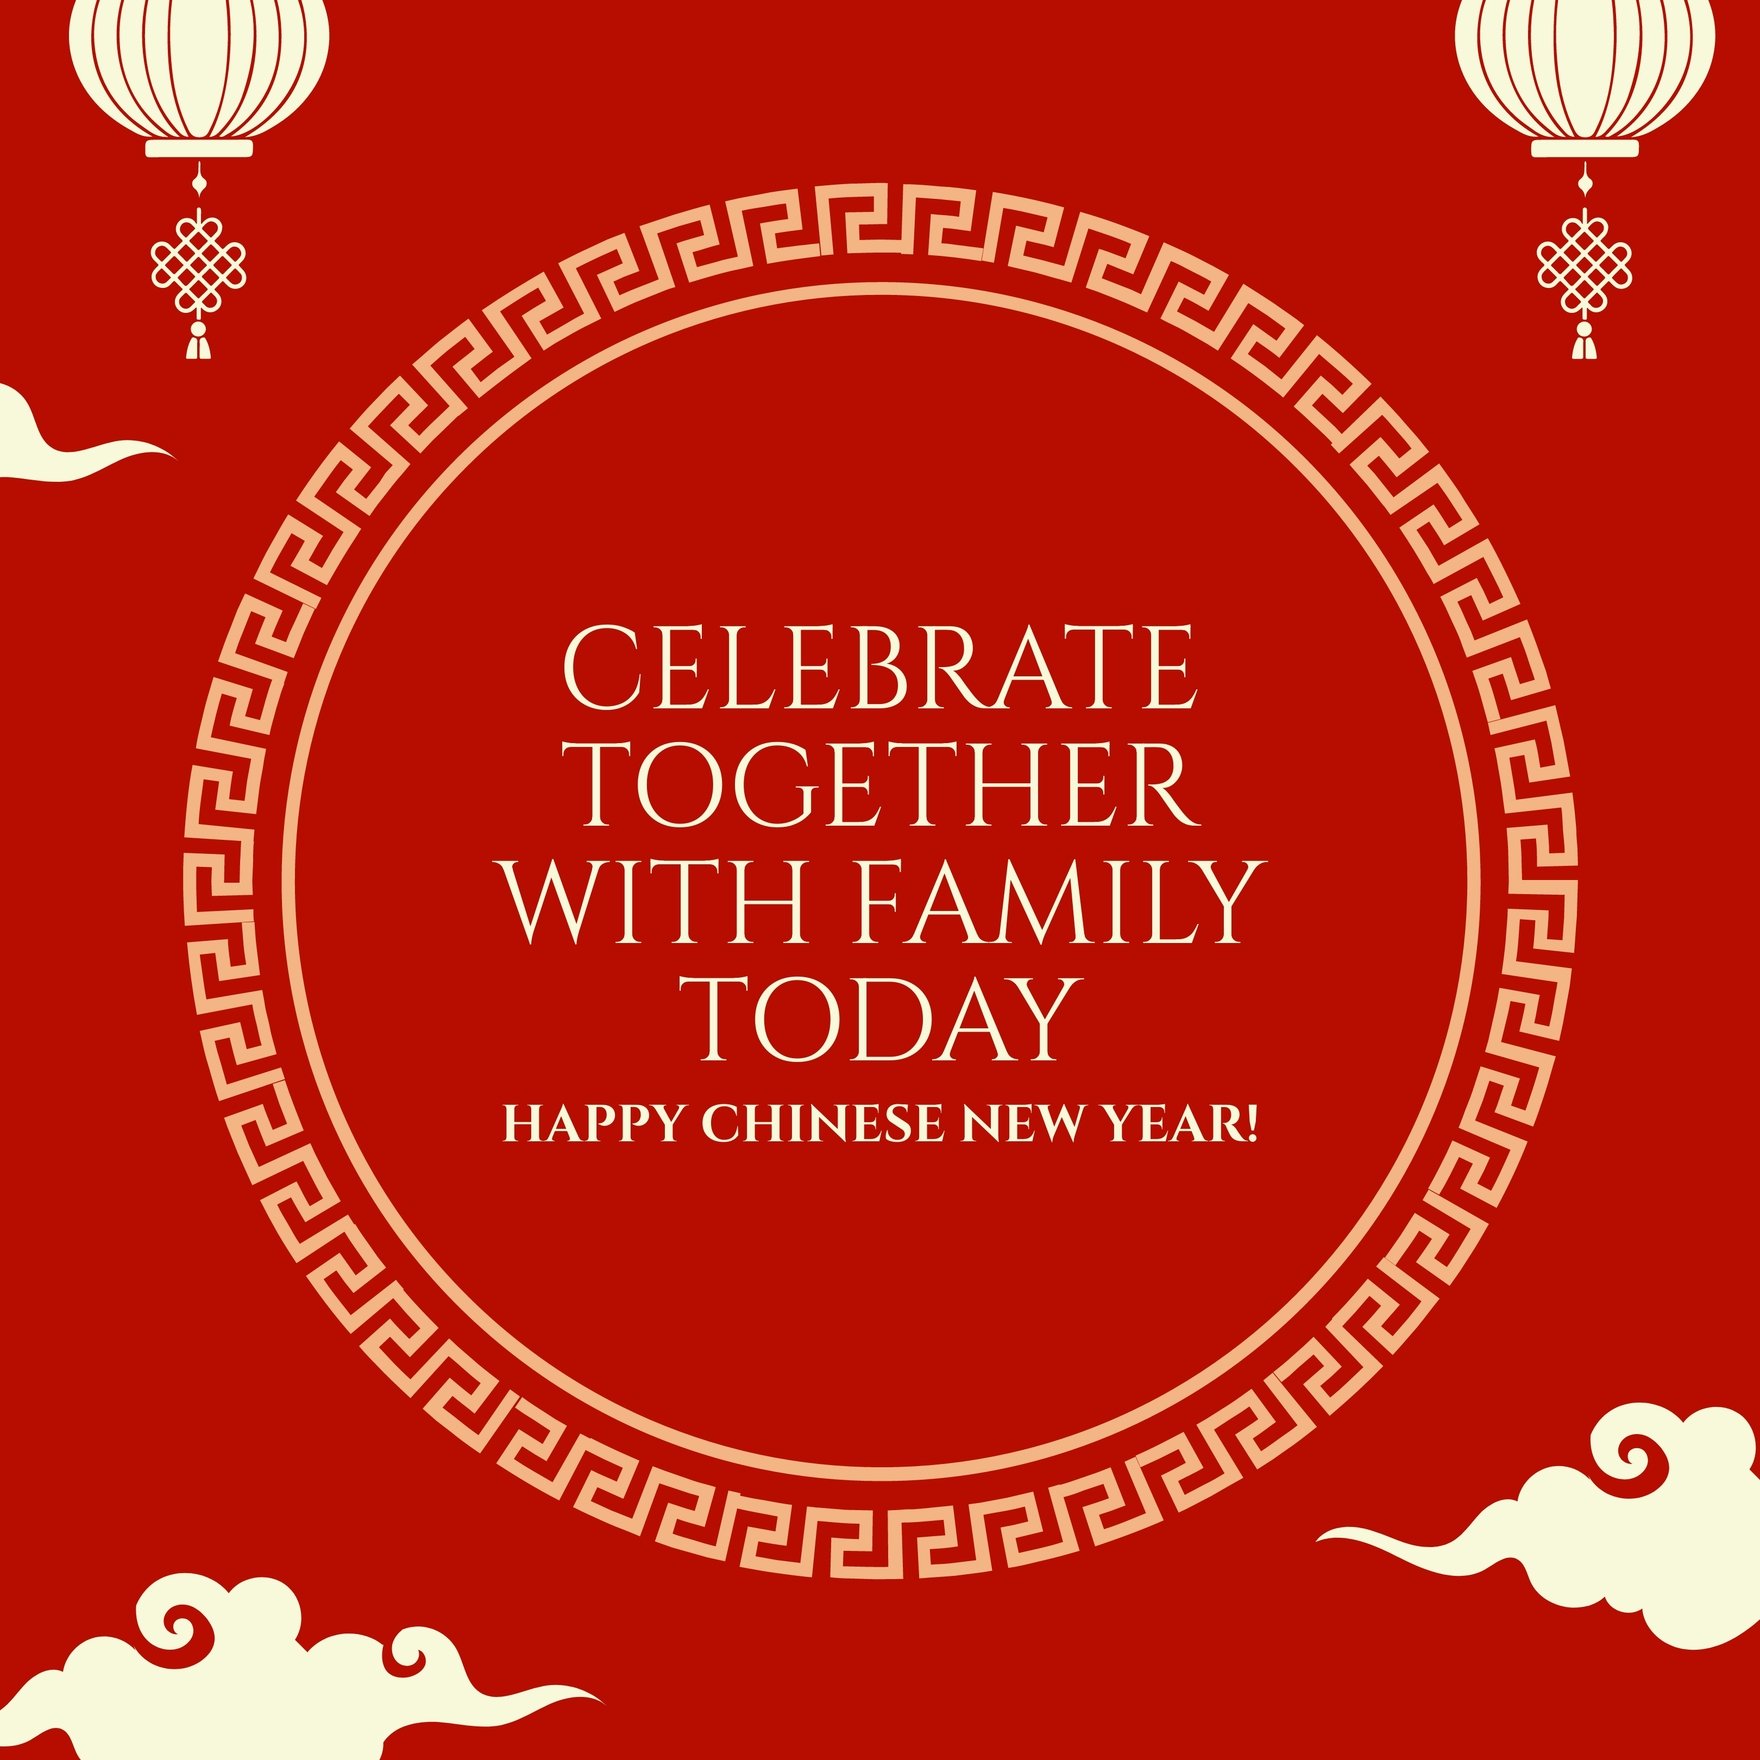 Chinese New Year FB Post in Illustrator, PSD, EPS, SVG, PNG, JPEG